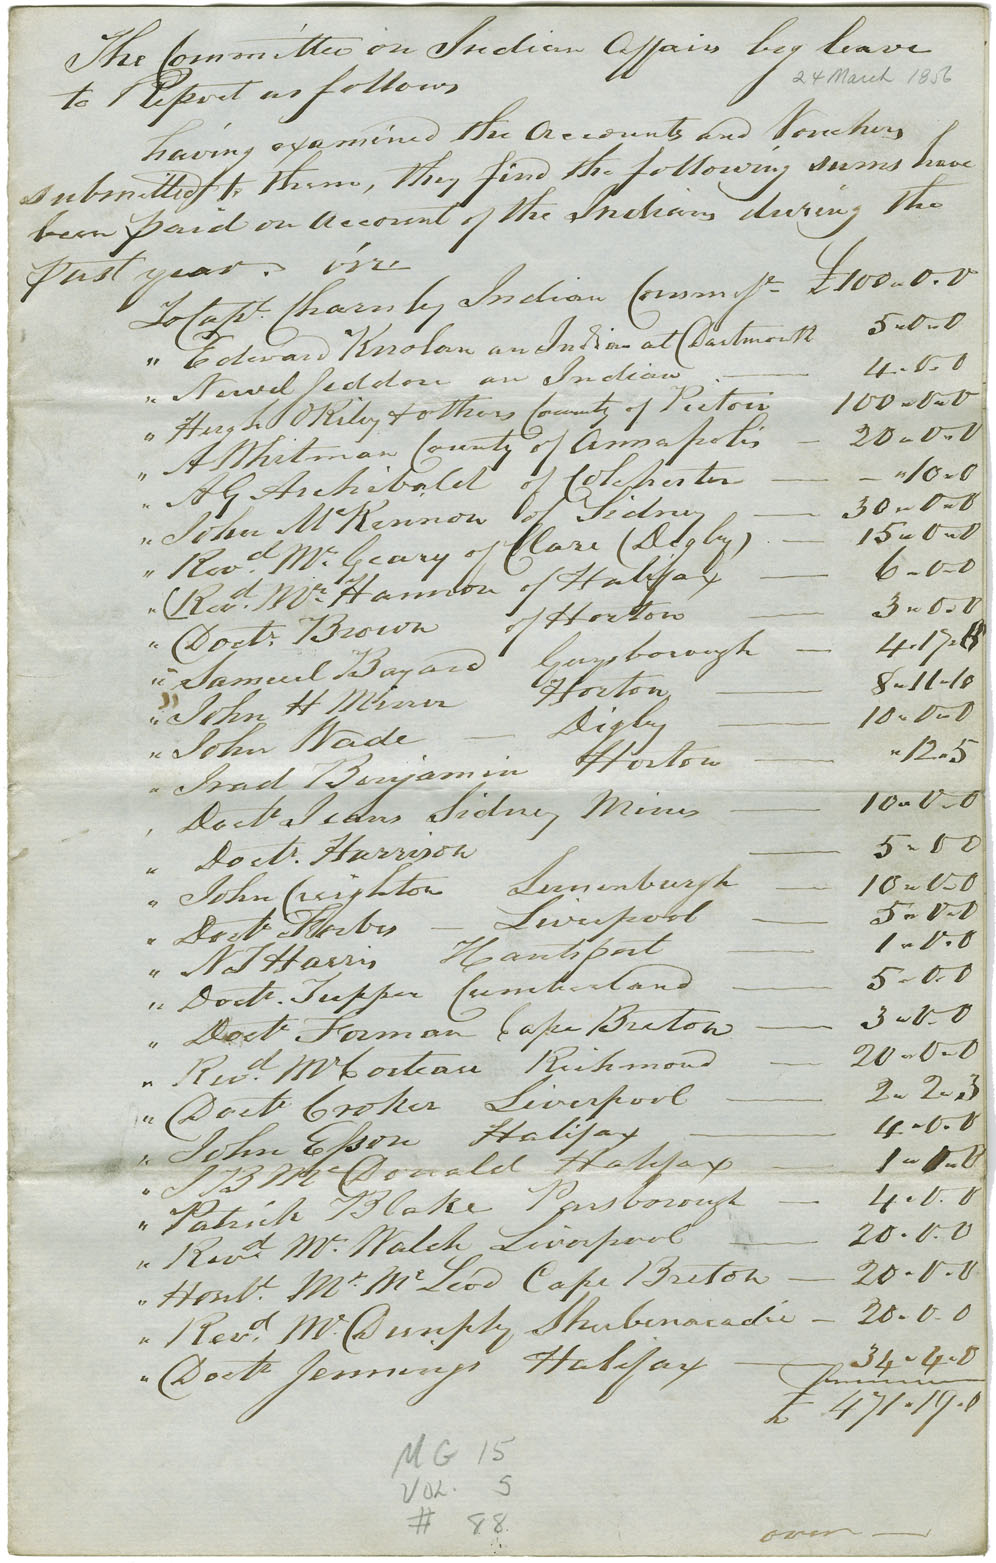 Report of the Committee on Indian Affairs, showing sums paid on account of the Mi'kmaq.